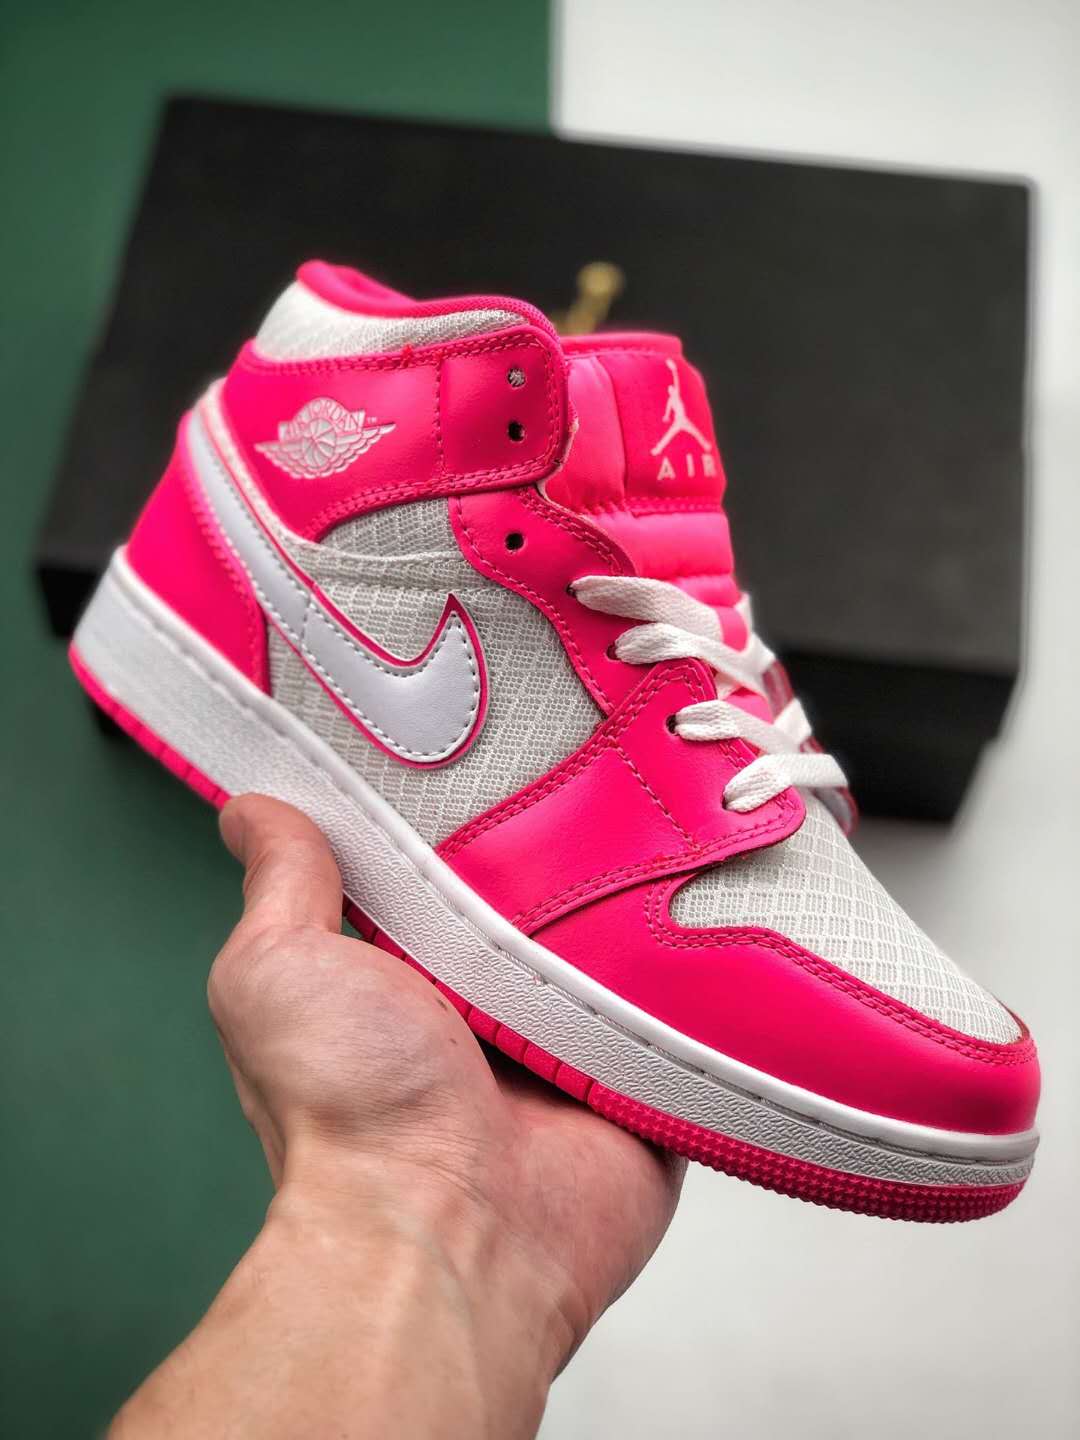 Air Jordan 1 Mid 'Hyper Pink' 555112-611 - Stylish and vibrant sneaker for all.